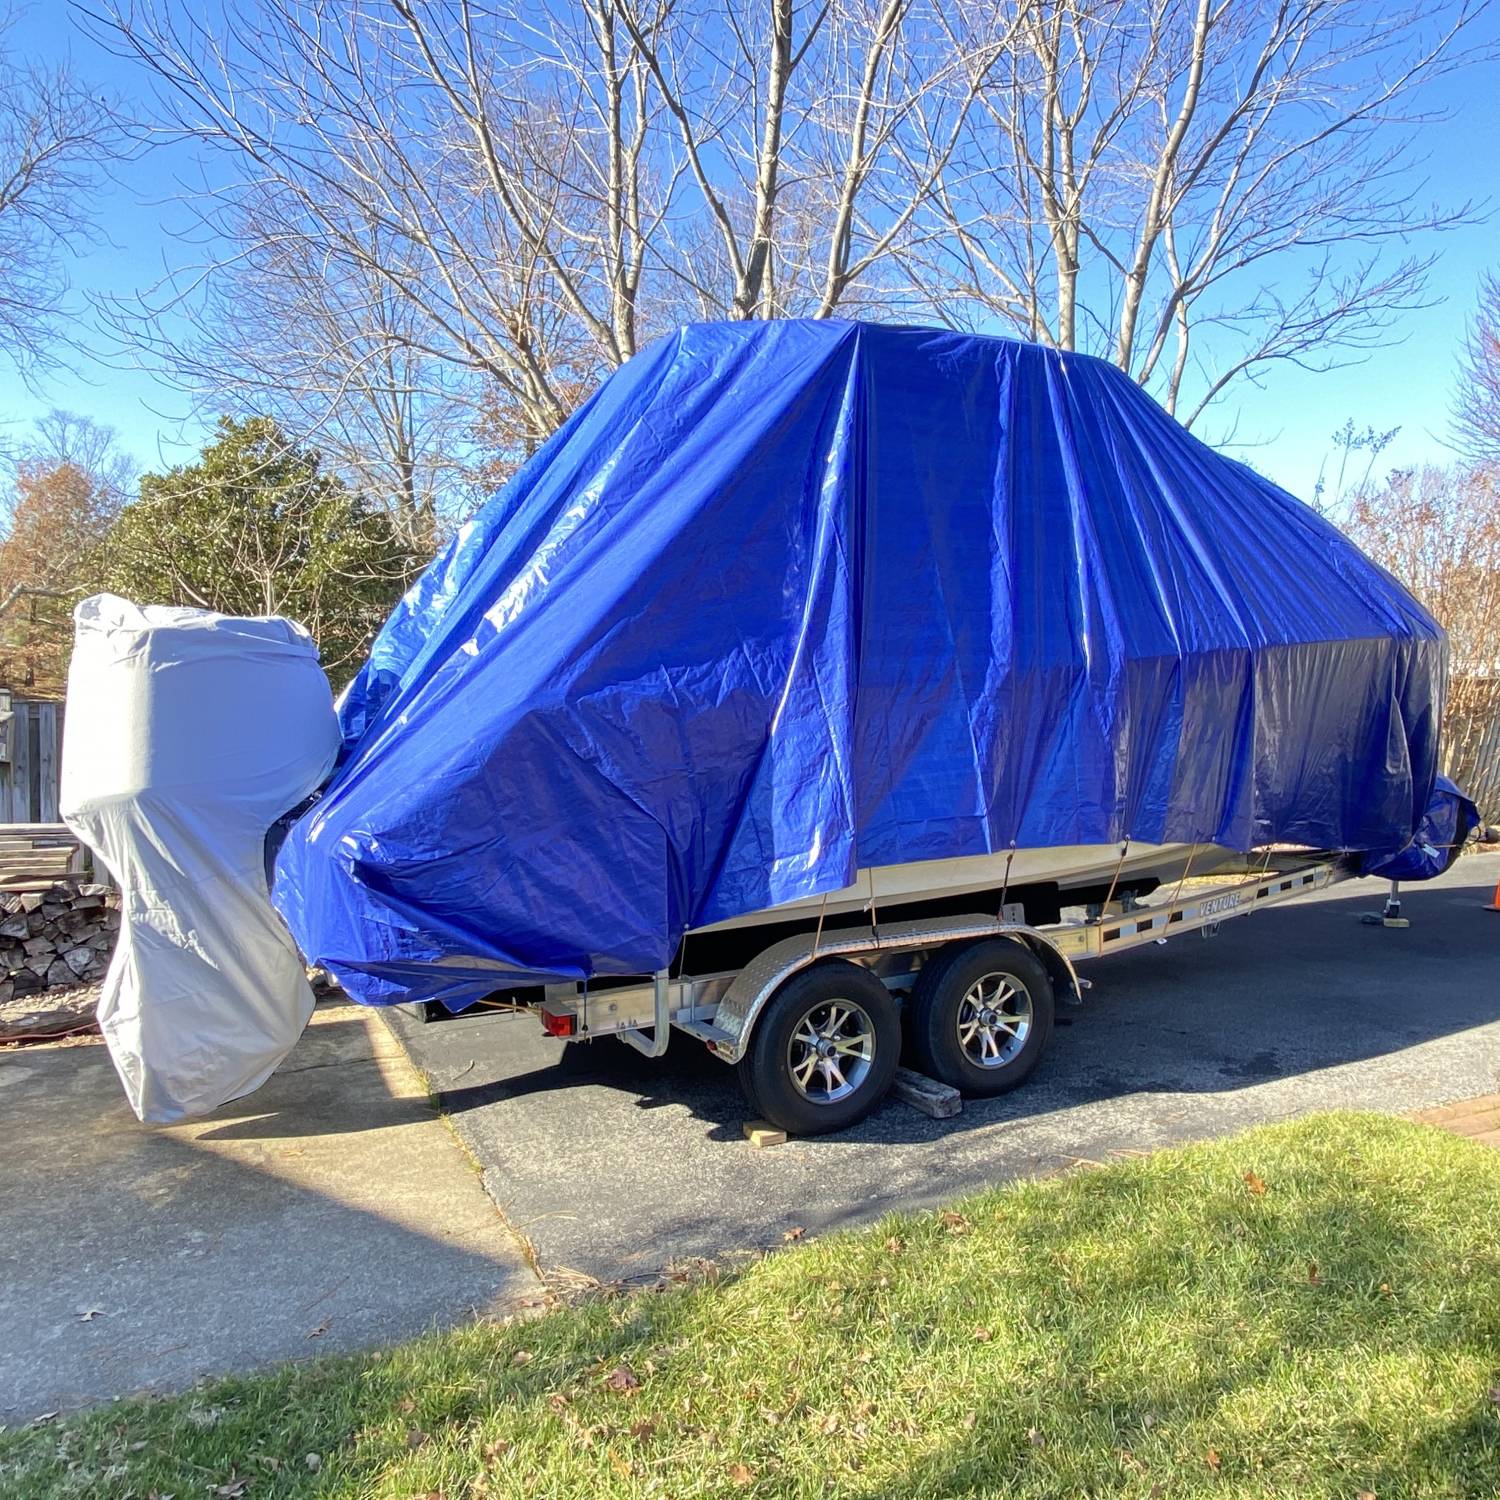 Ready to be untarped. Come on Summer ! ☀️